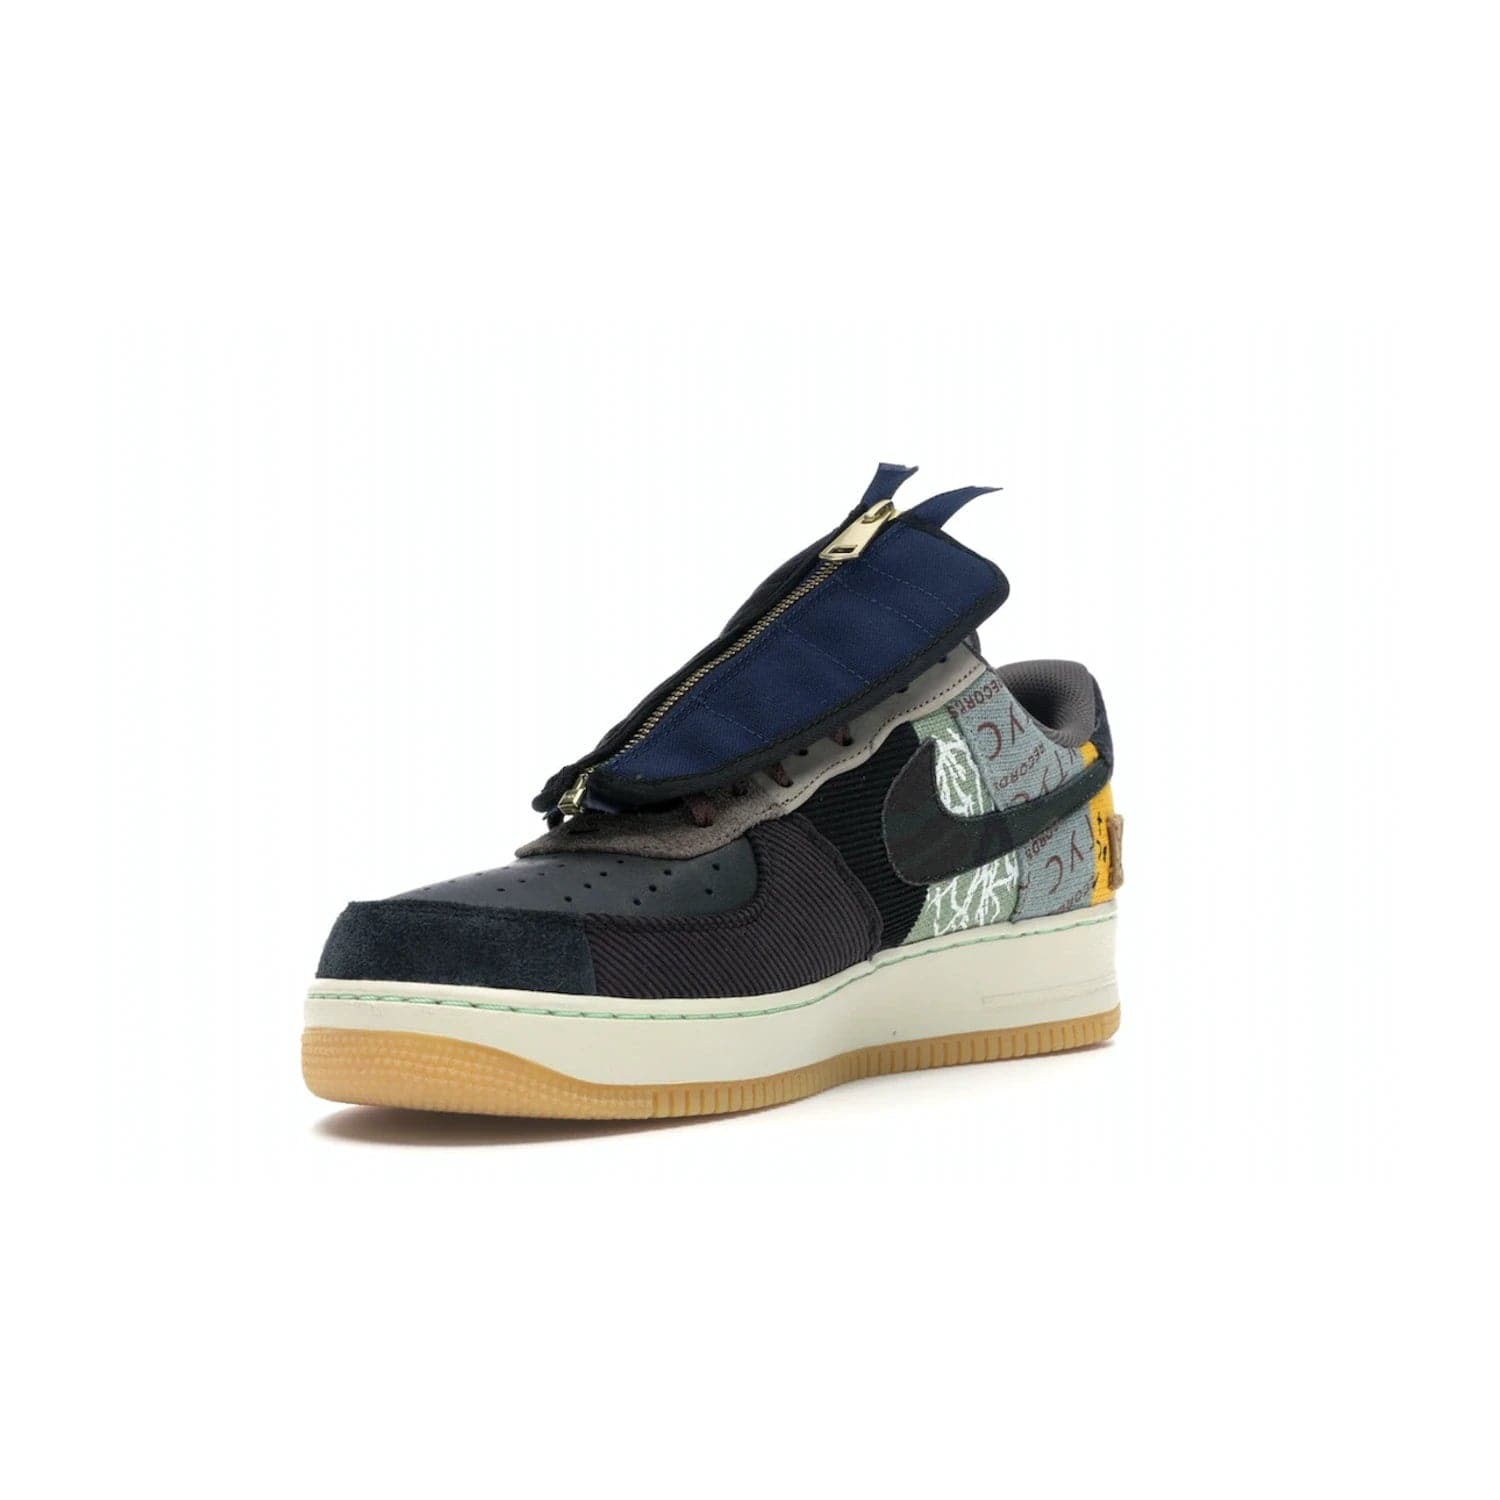 Nike Air Force 1 Low Travis Scott Cactus Jack - Image 14 - Only at www.BallersClubKickz.com - The Nike Air Force 1 Low Travis Scott Cactus Jack features a unique, multi-colored patchwork upper with muted bronze and fossil accents. Includes detachable lace cover, brass zipper, and Cactus Jack insignias. A sail midsole, gum rubber outsole complete the eye-catching design. Perfect for comfort and style with unexpected touches of detail.